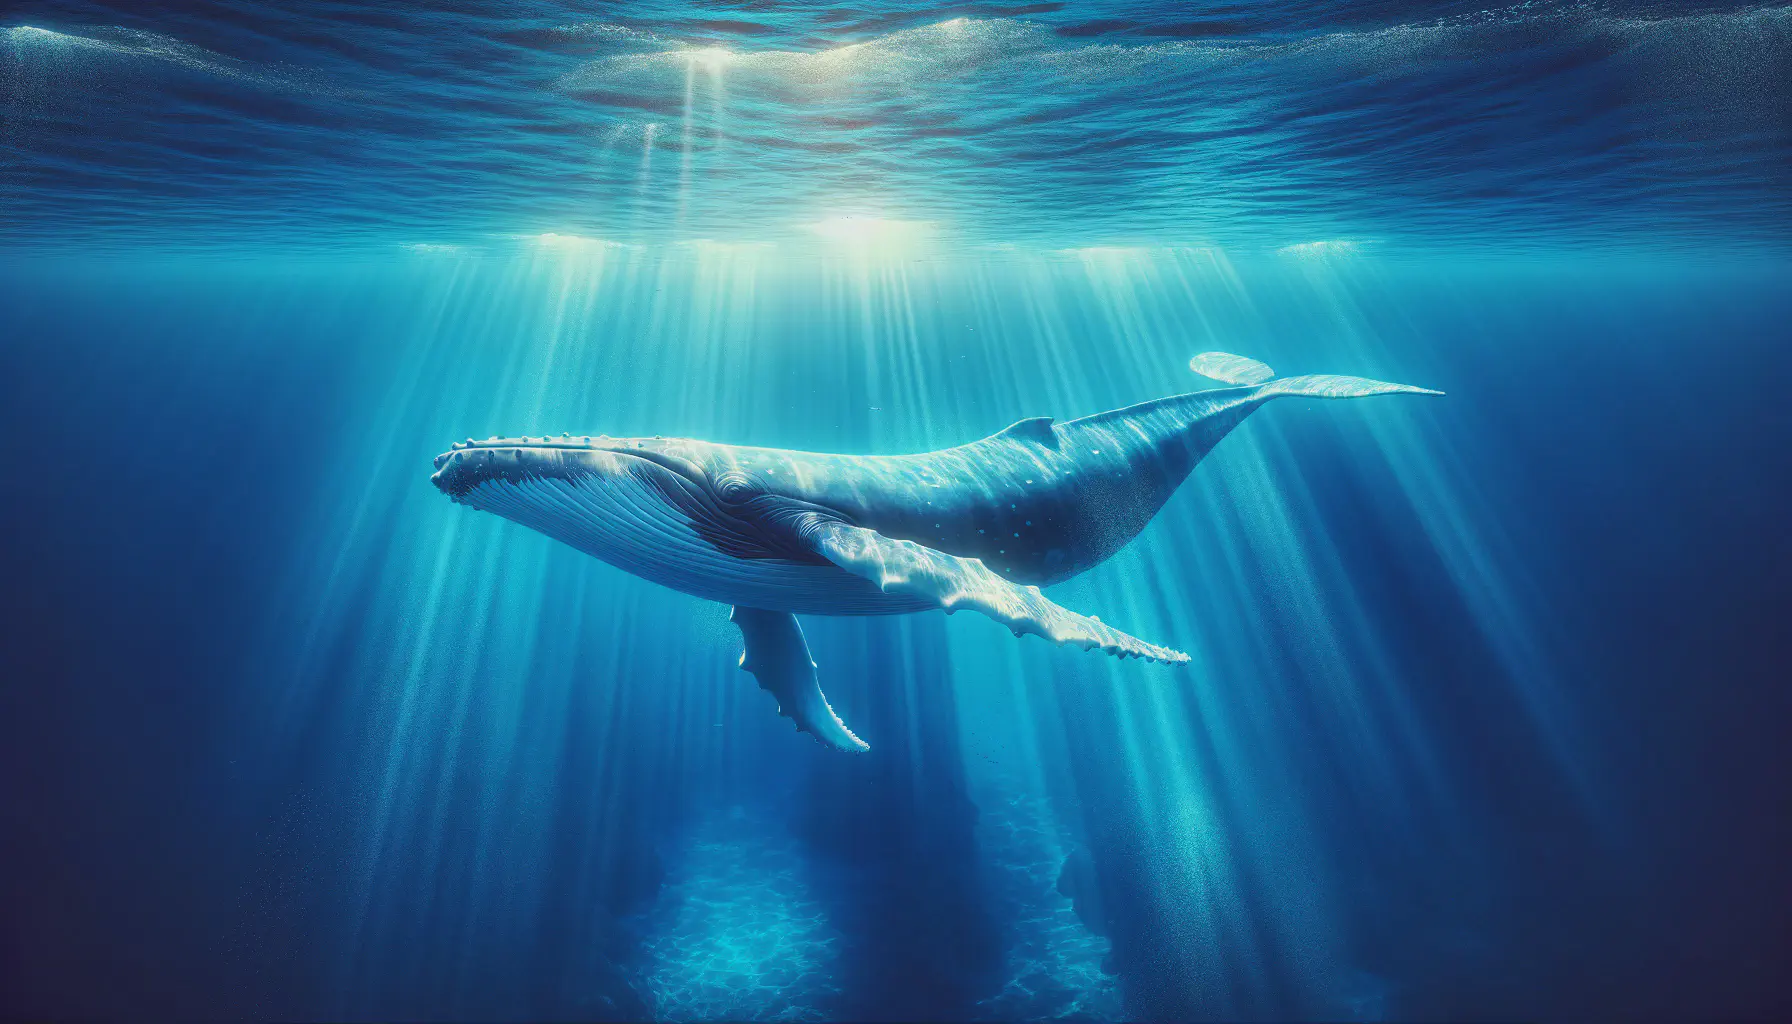 An image of a whale.